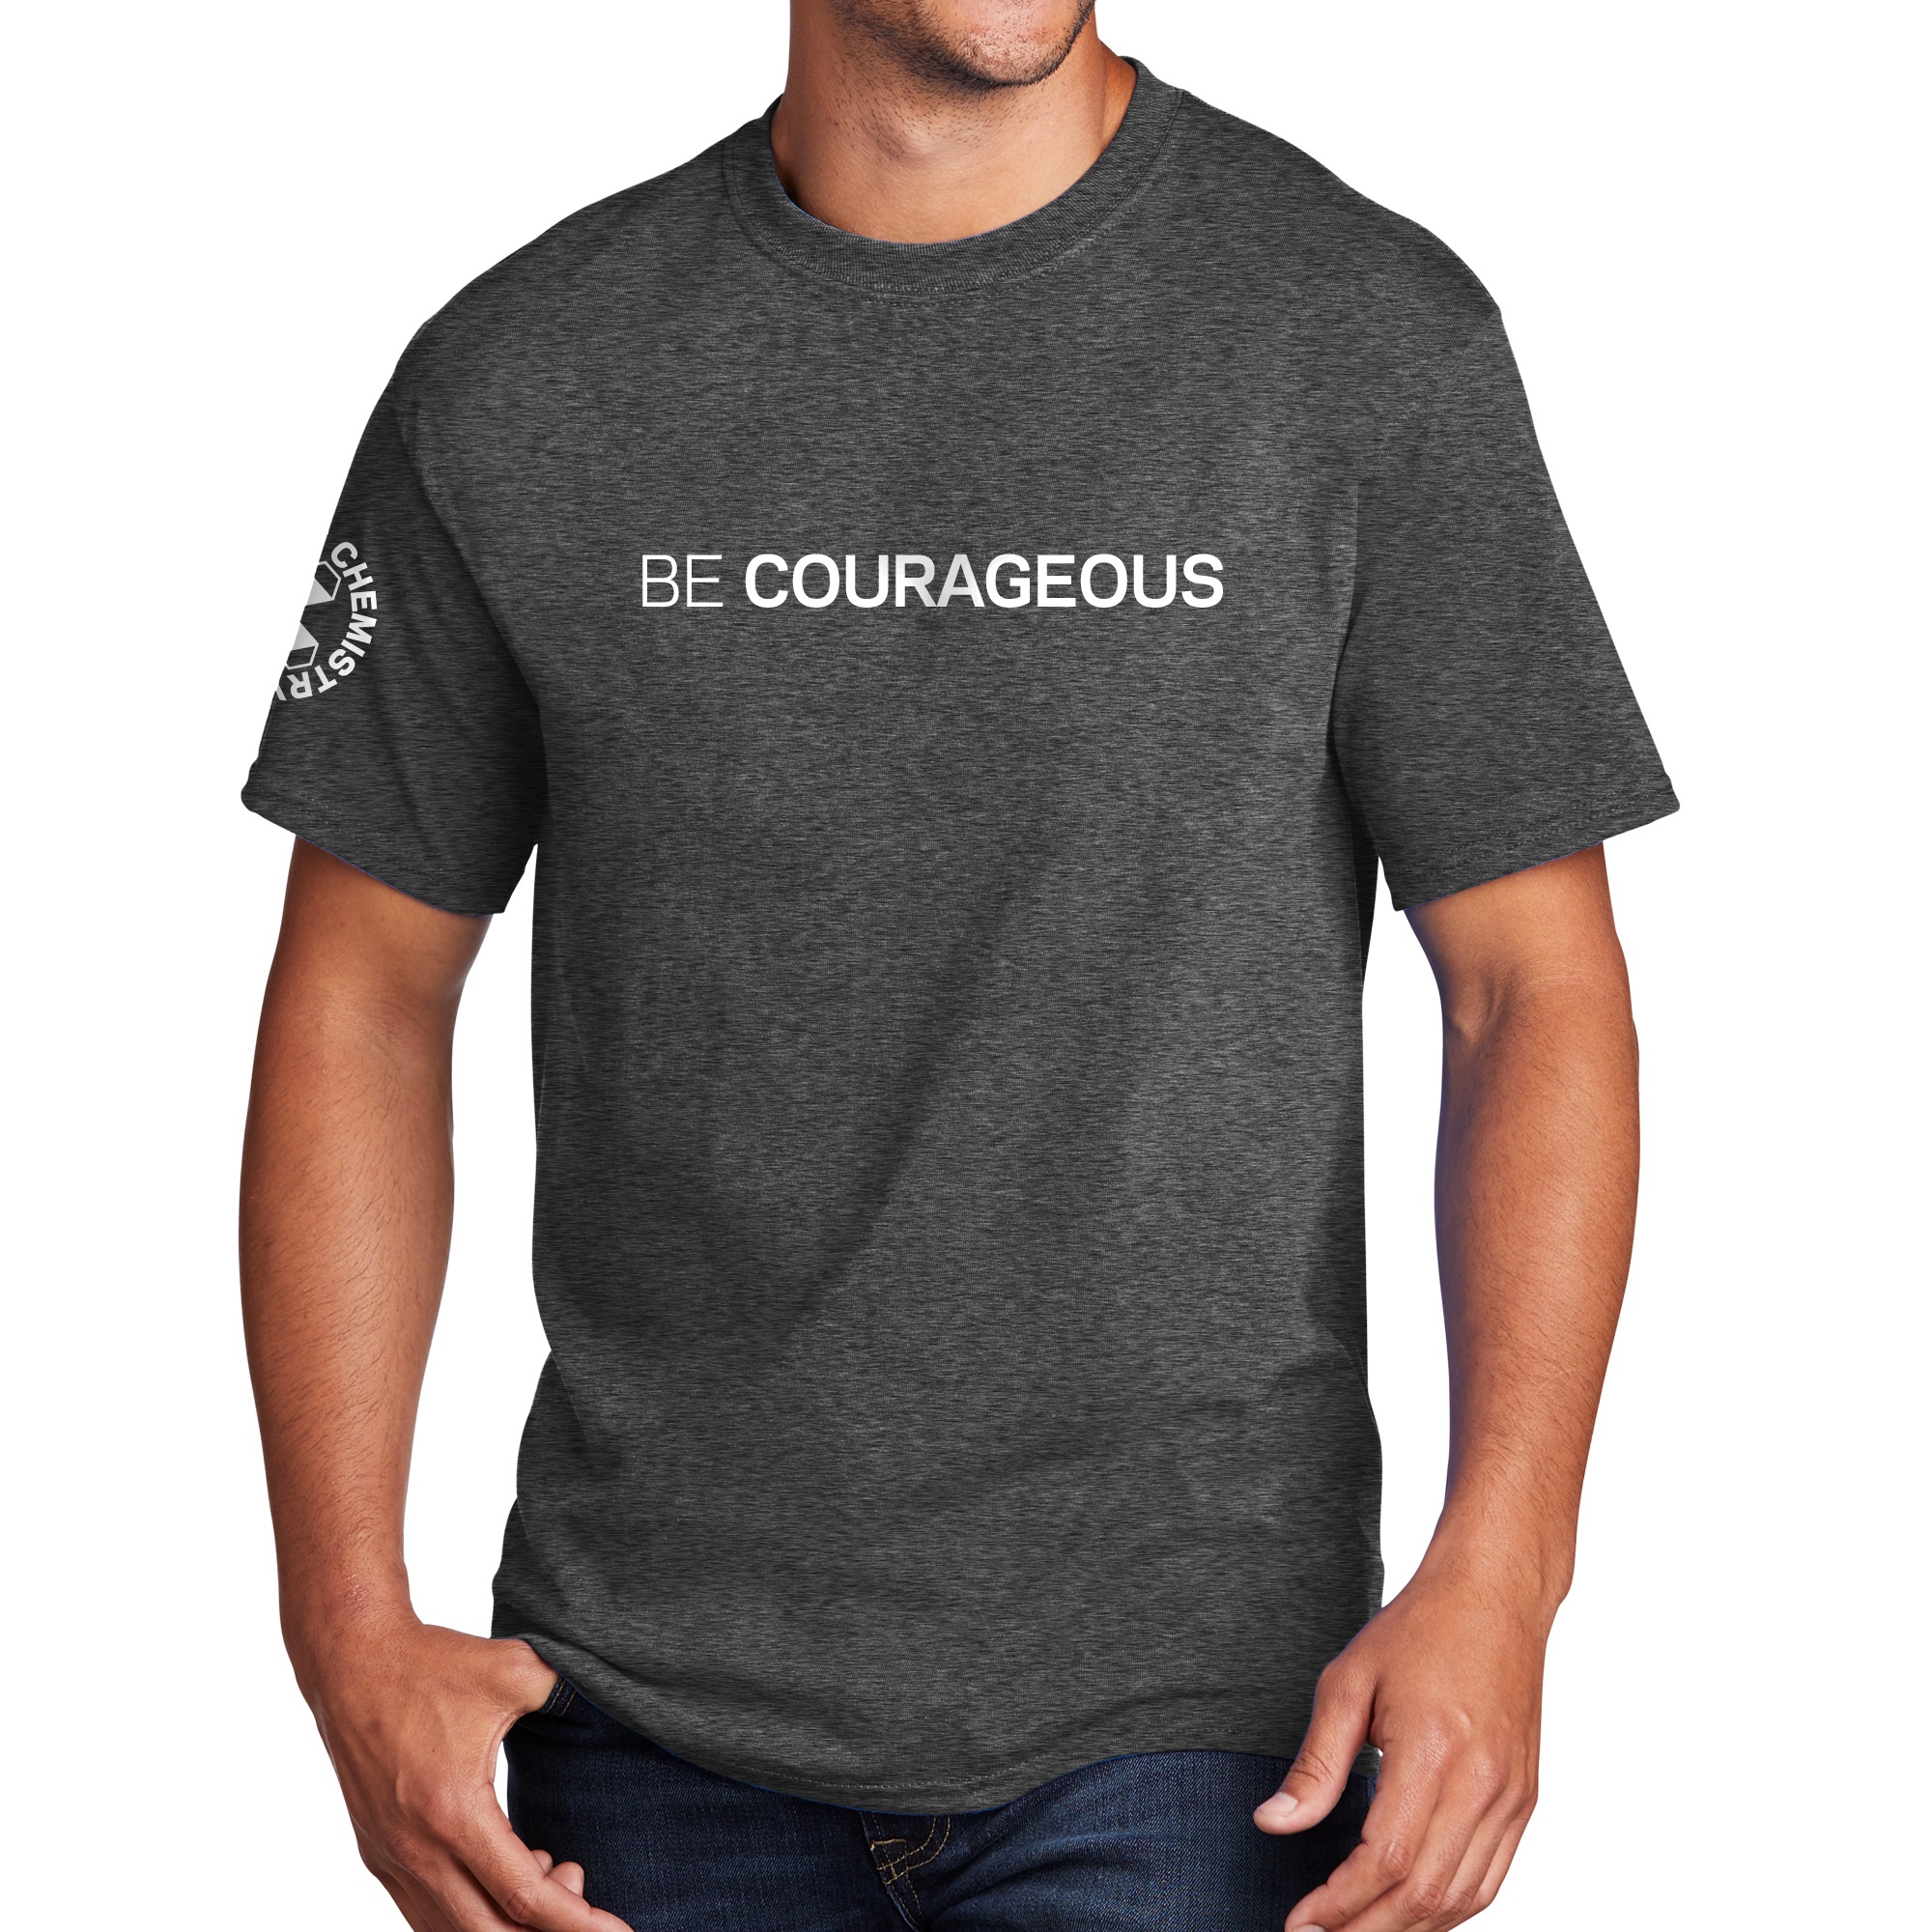 Be Courageous T-Shirt